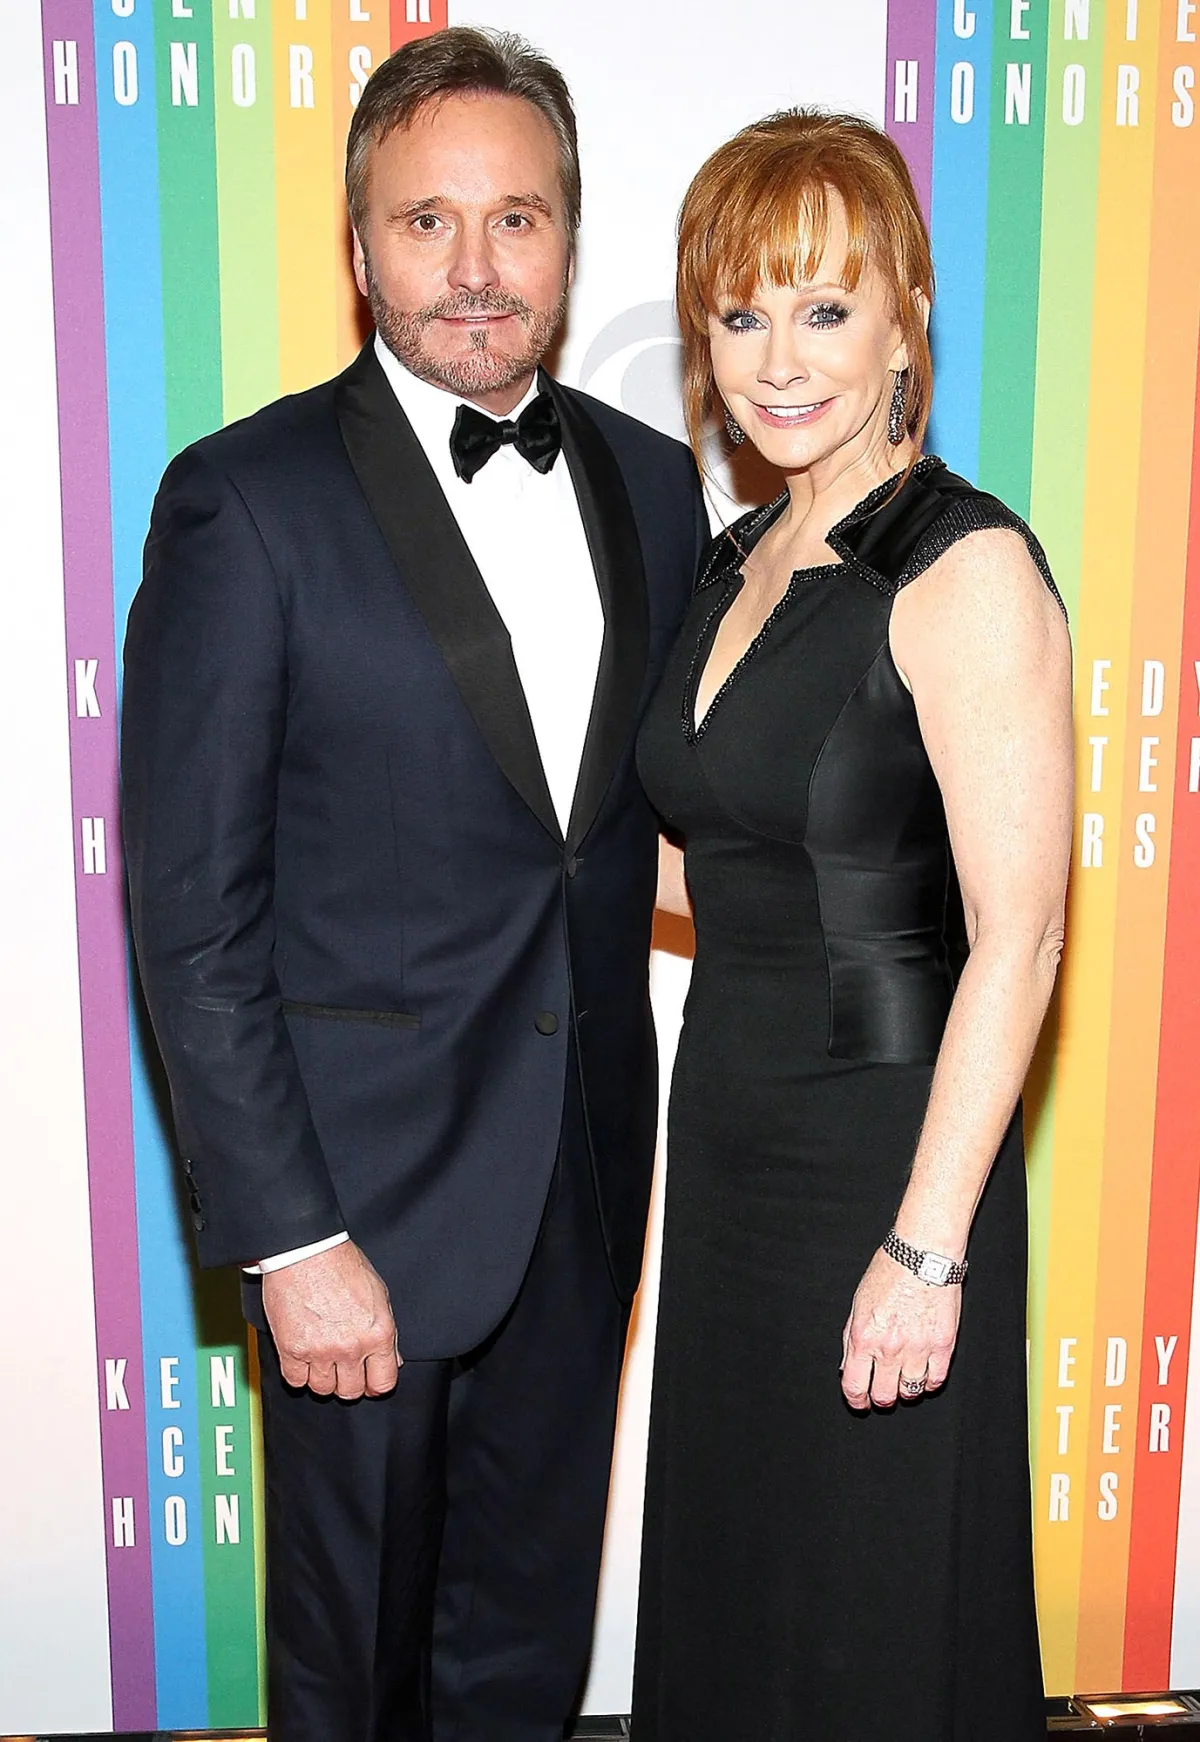 Reba McEntire Describes Marriage to Narvel Blackstock as 'Strictly Business'